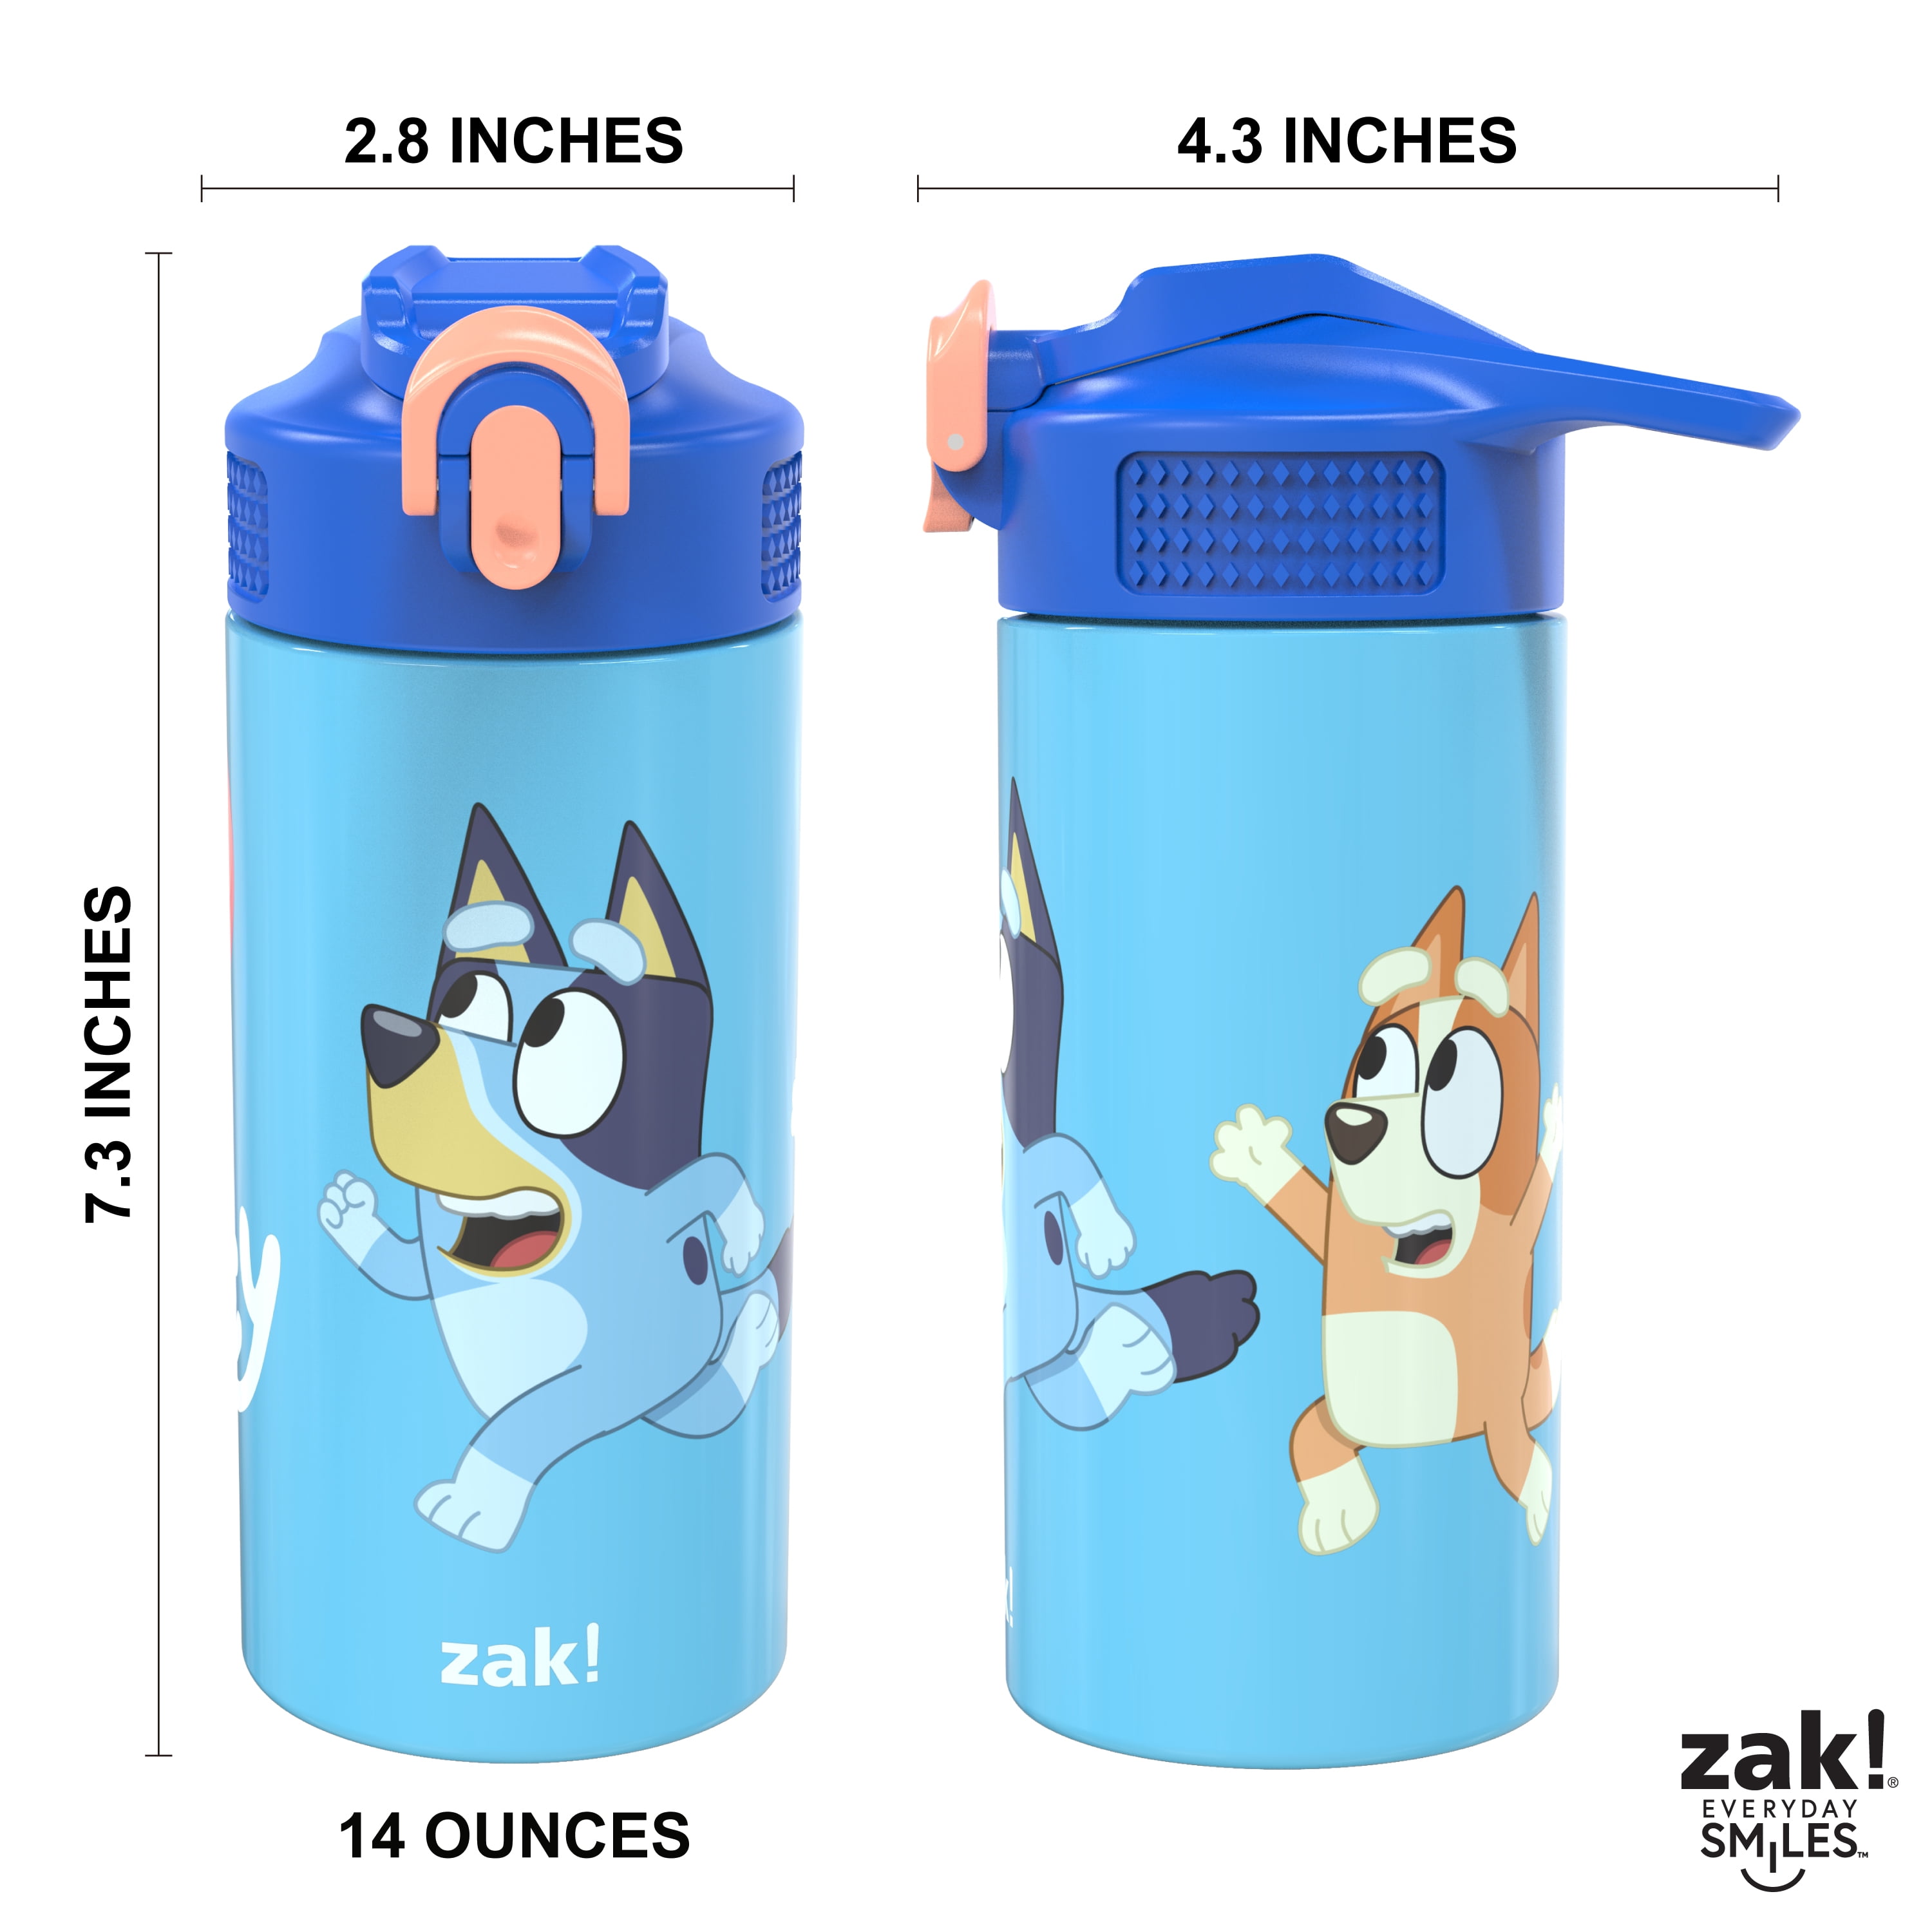 Zak! Bluey Antimicrobial Stainless Steel Double Wall Vacuum Leakproof Straw Kincaid Tumbler - 12 oz